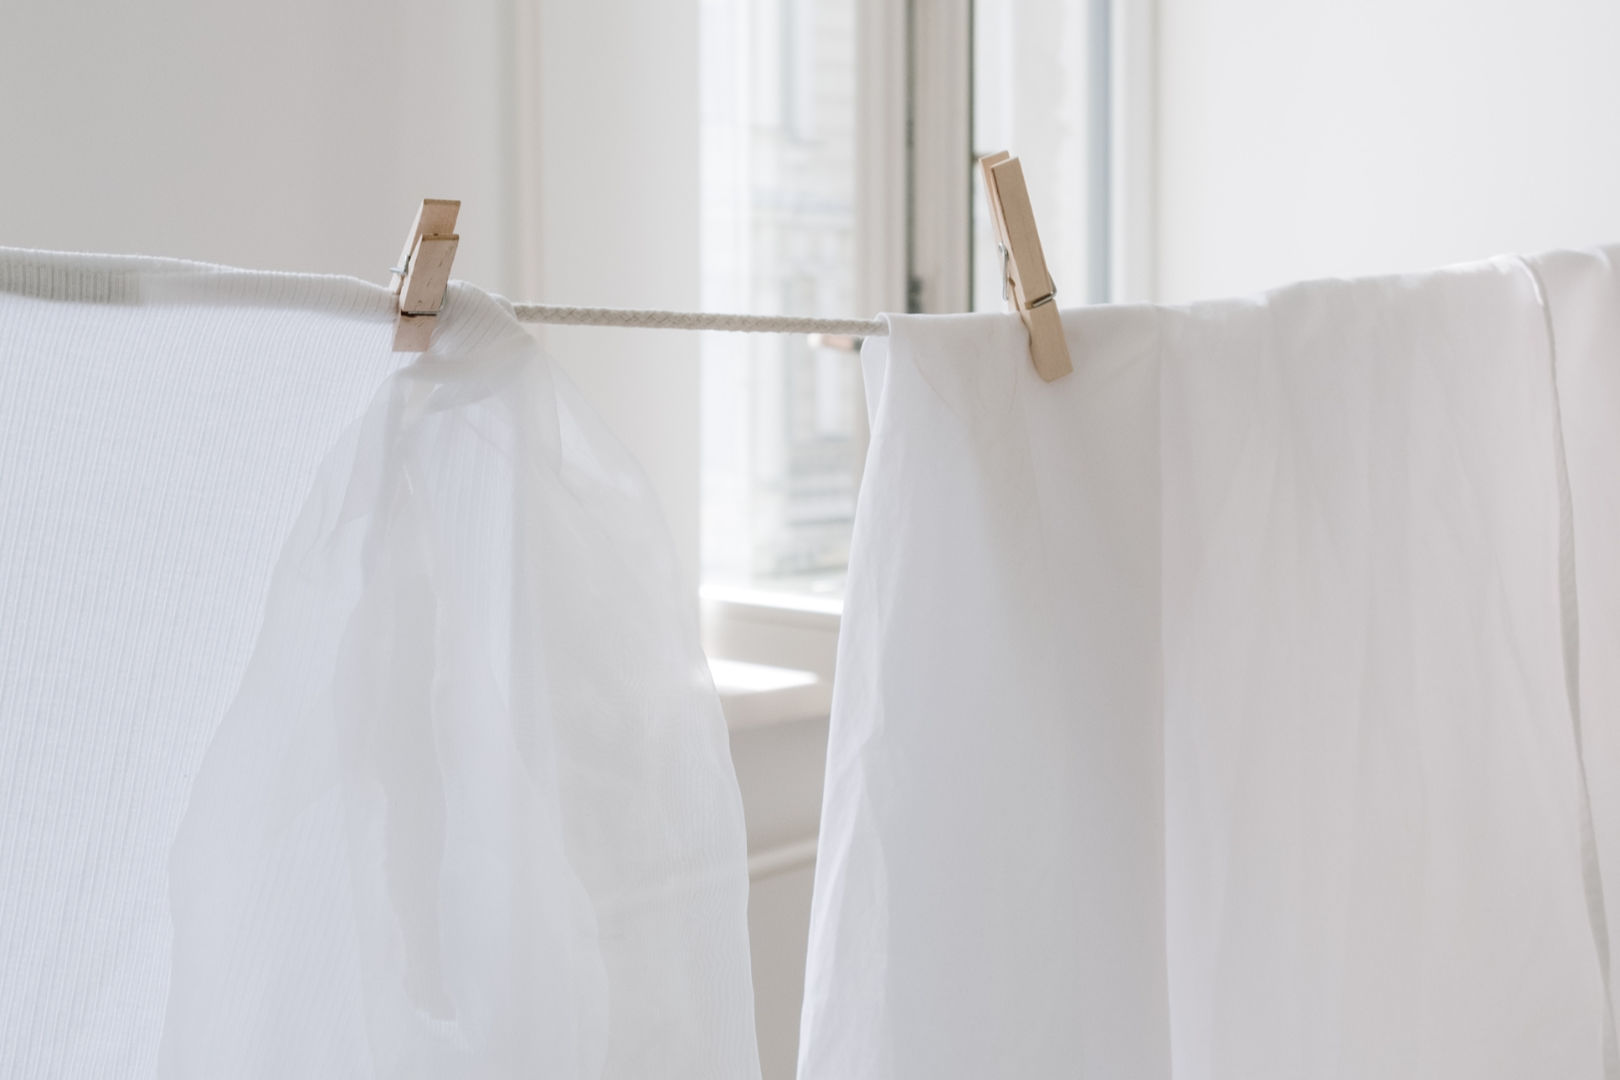 Clean white linens hanged in a clothes line pinned using natural bamboo clothespins.